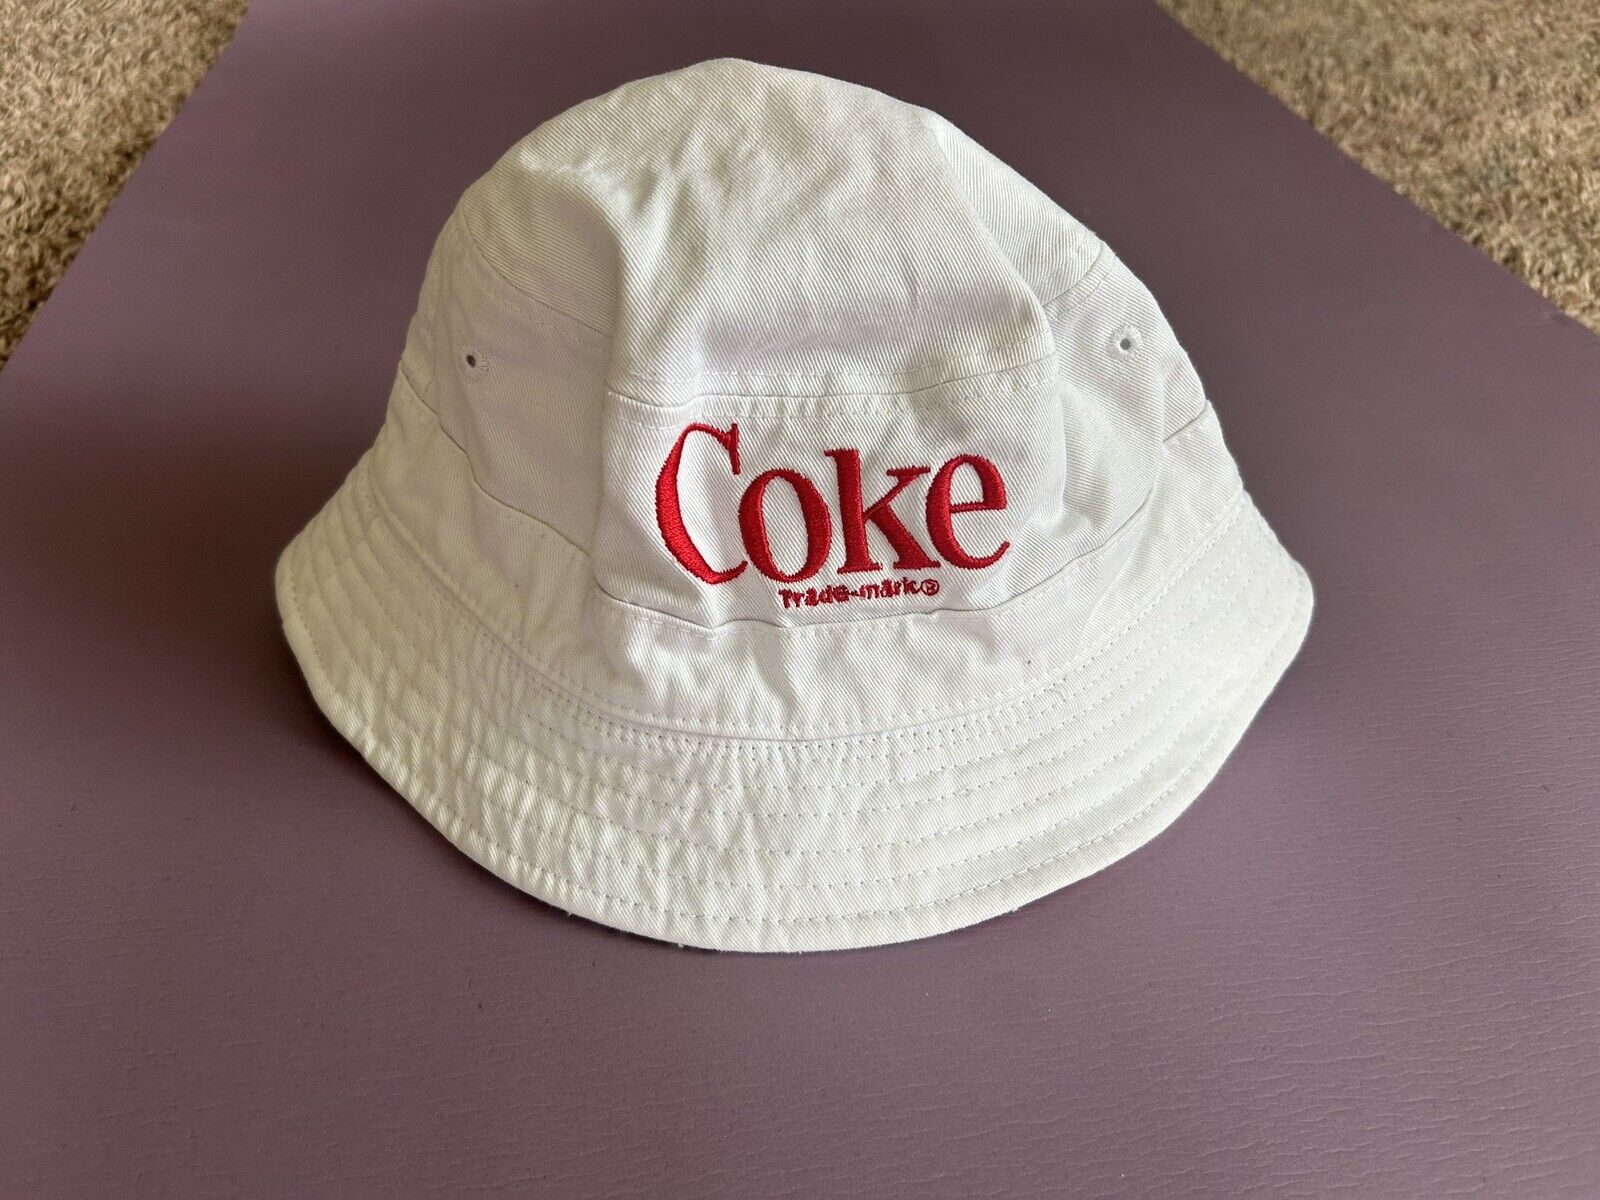 Coca Cola It’s The Real Thing Reversible Logo Bucket Hat. Red & White. 7.25”